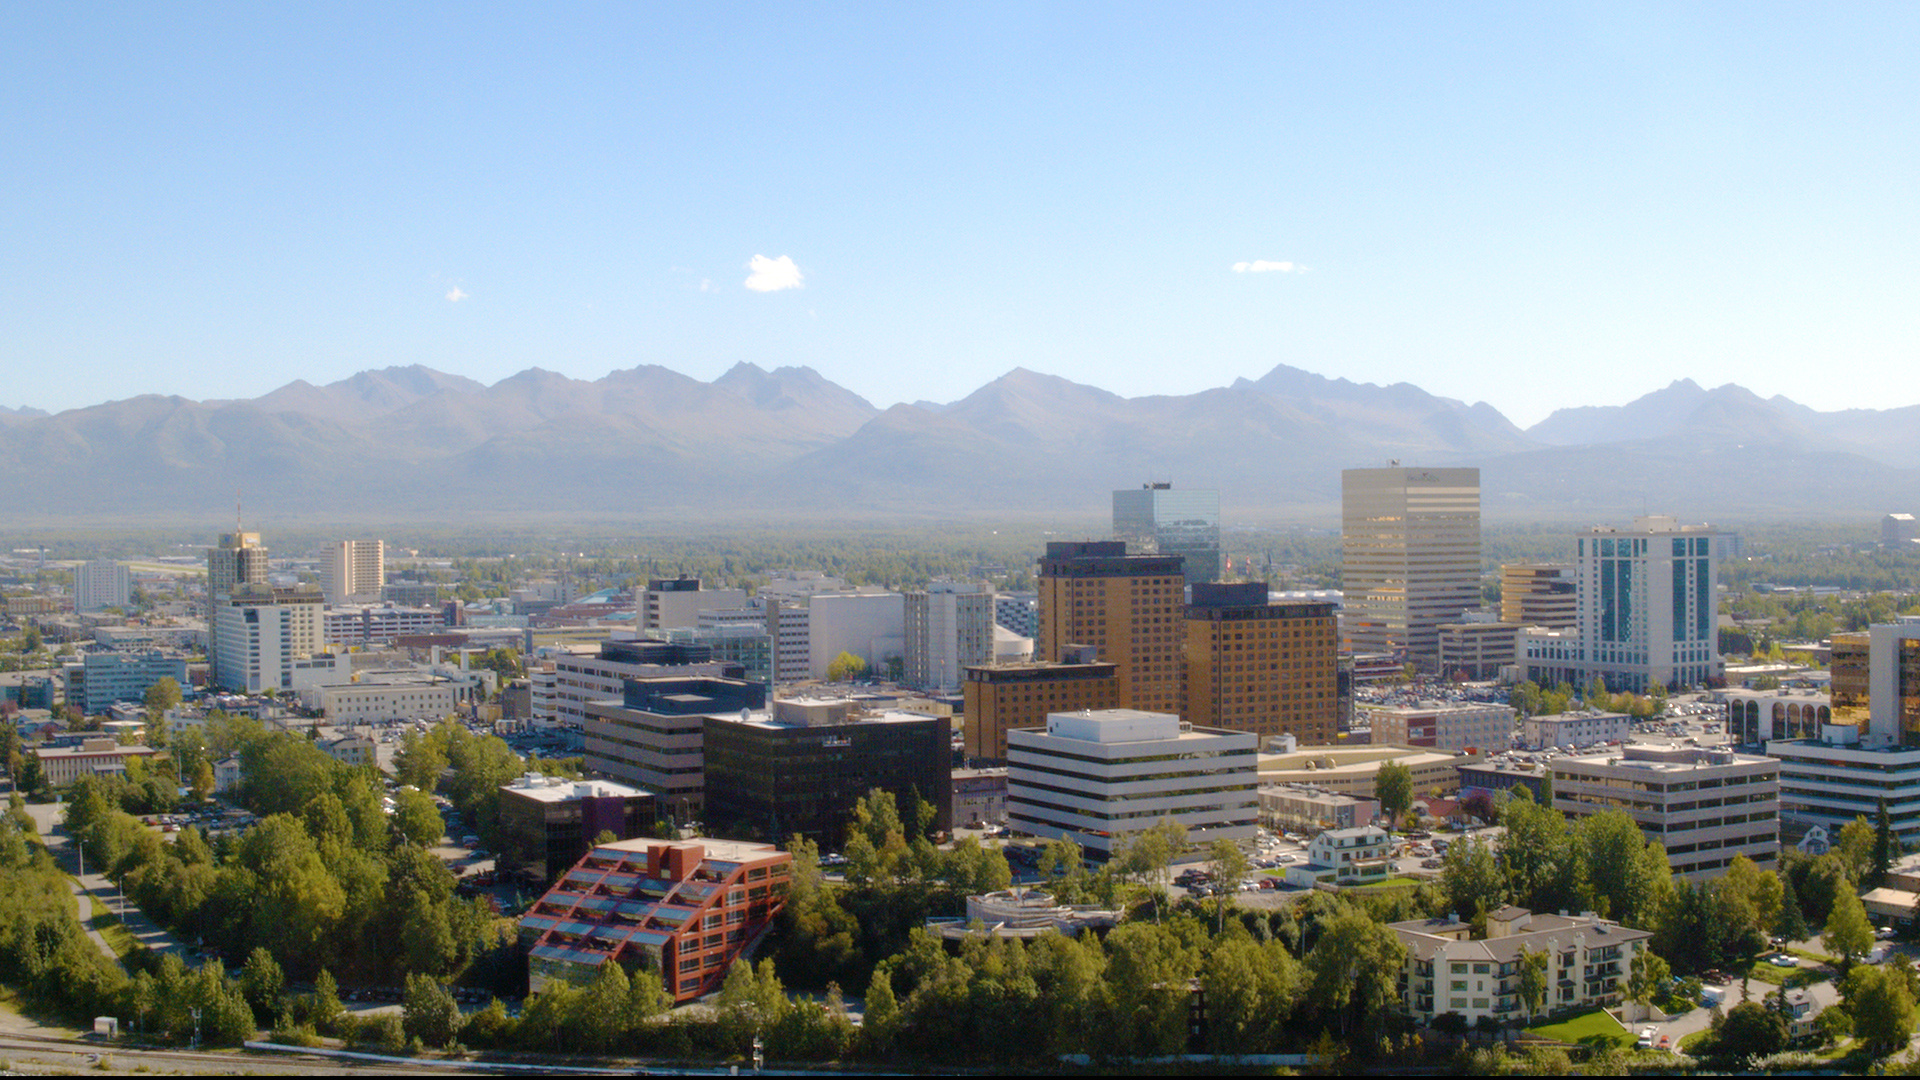 Anchorage economic development, Contact AEDC, Business opportunities, Growth potential, 1920x1080 Full HD Desktop